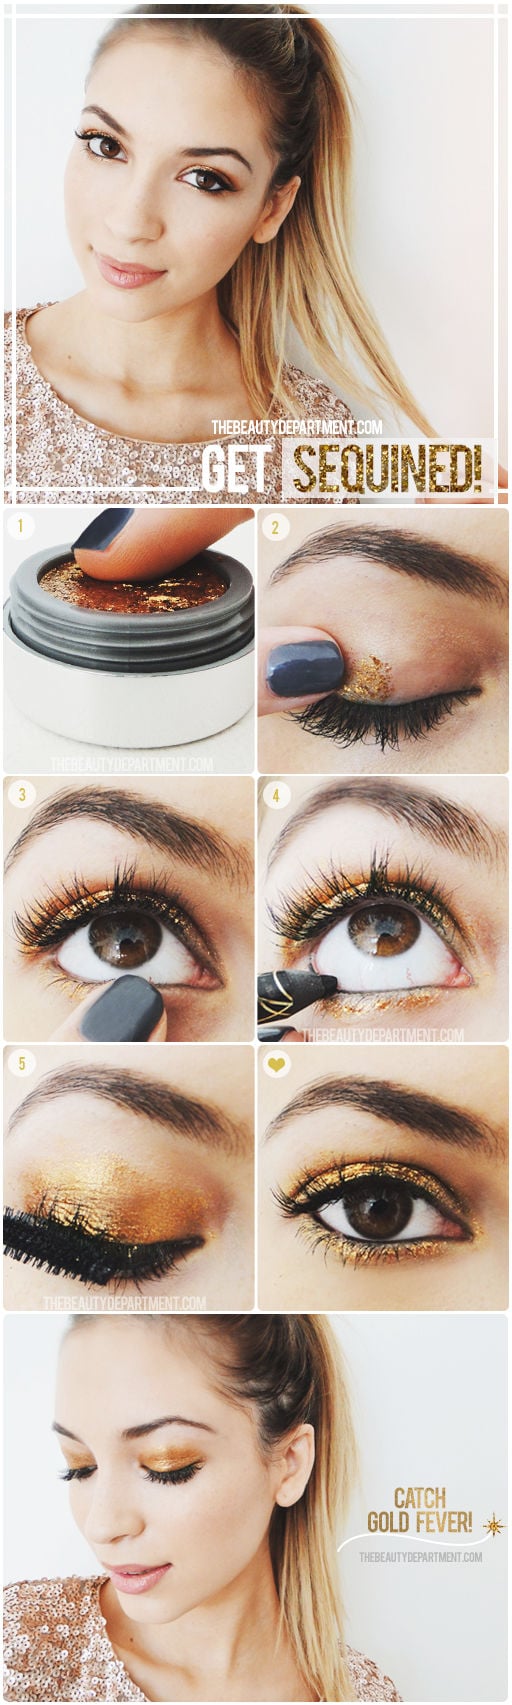 17 Amazing Makeup Ideas and Tutorials for Dramatic Look (11)